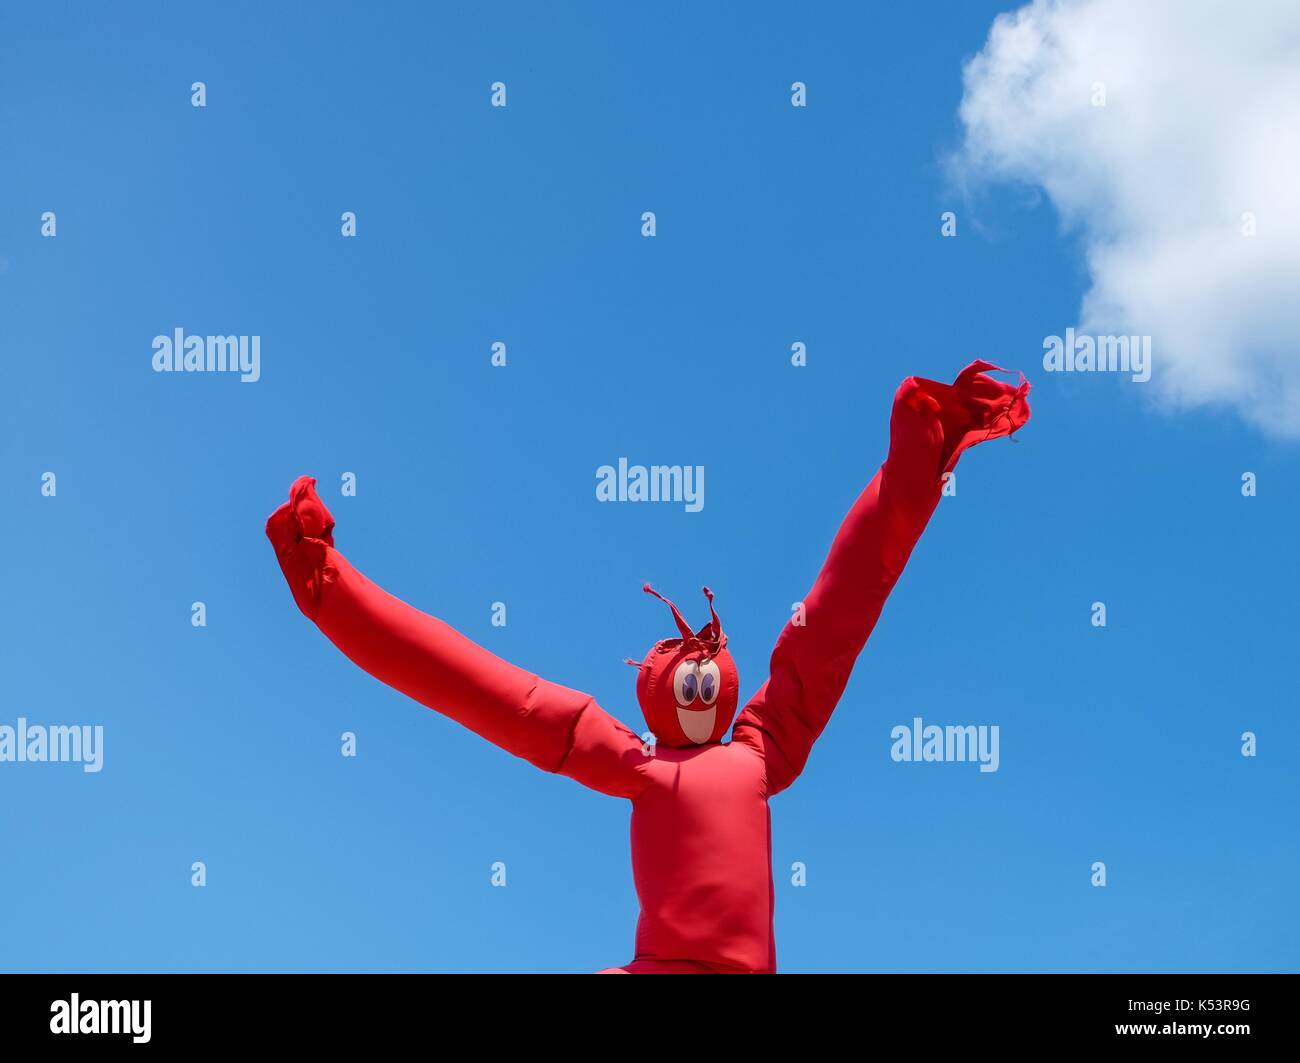 ST.PAUL, MN, USA - AUGUST, 2017: Inflatable Wacky Waving Dancing Tube Man at Minnesota State Fair - the largest state fair in the United States. Stock Photo